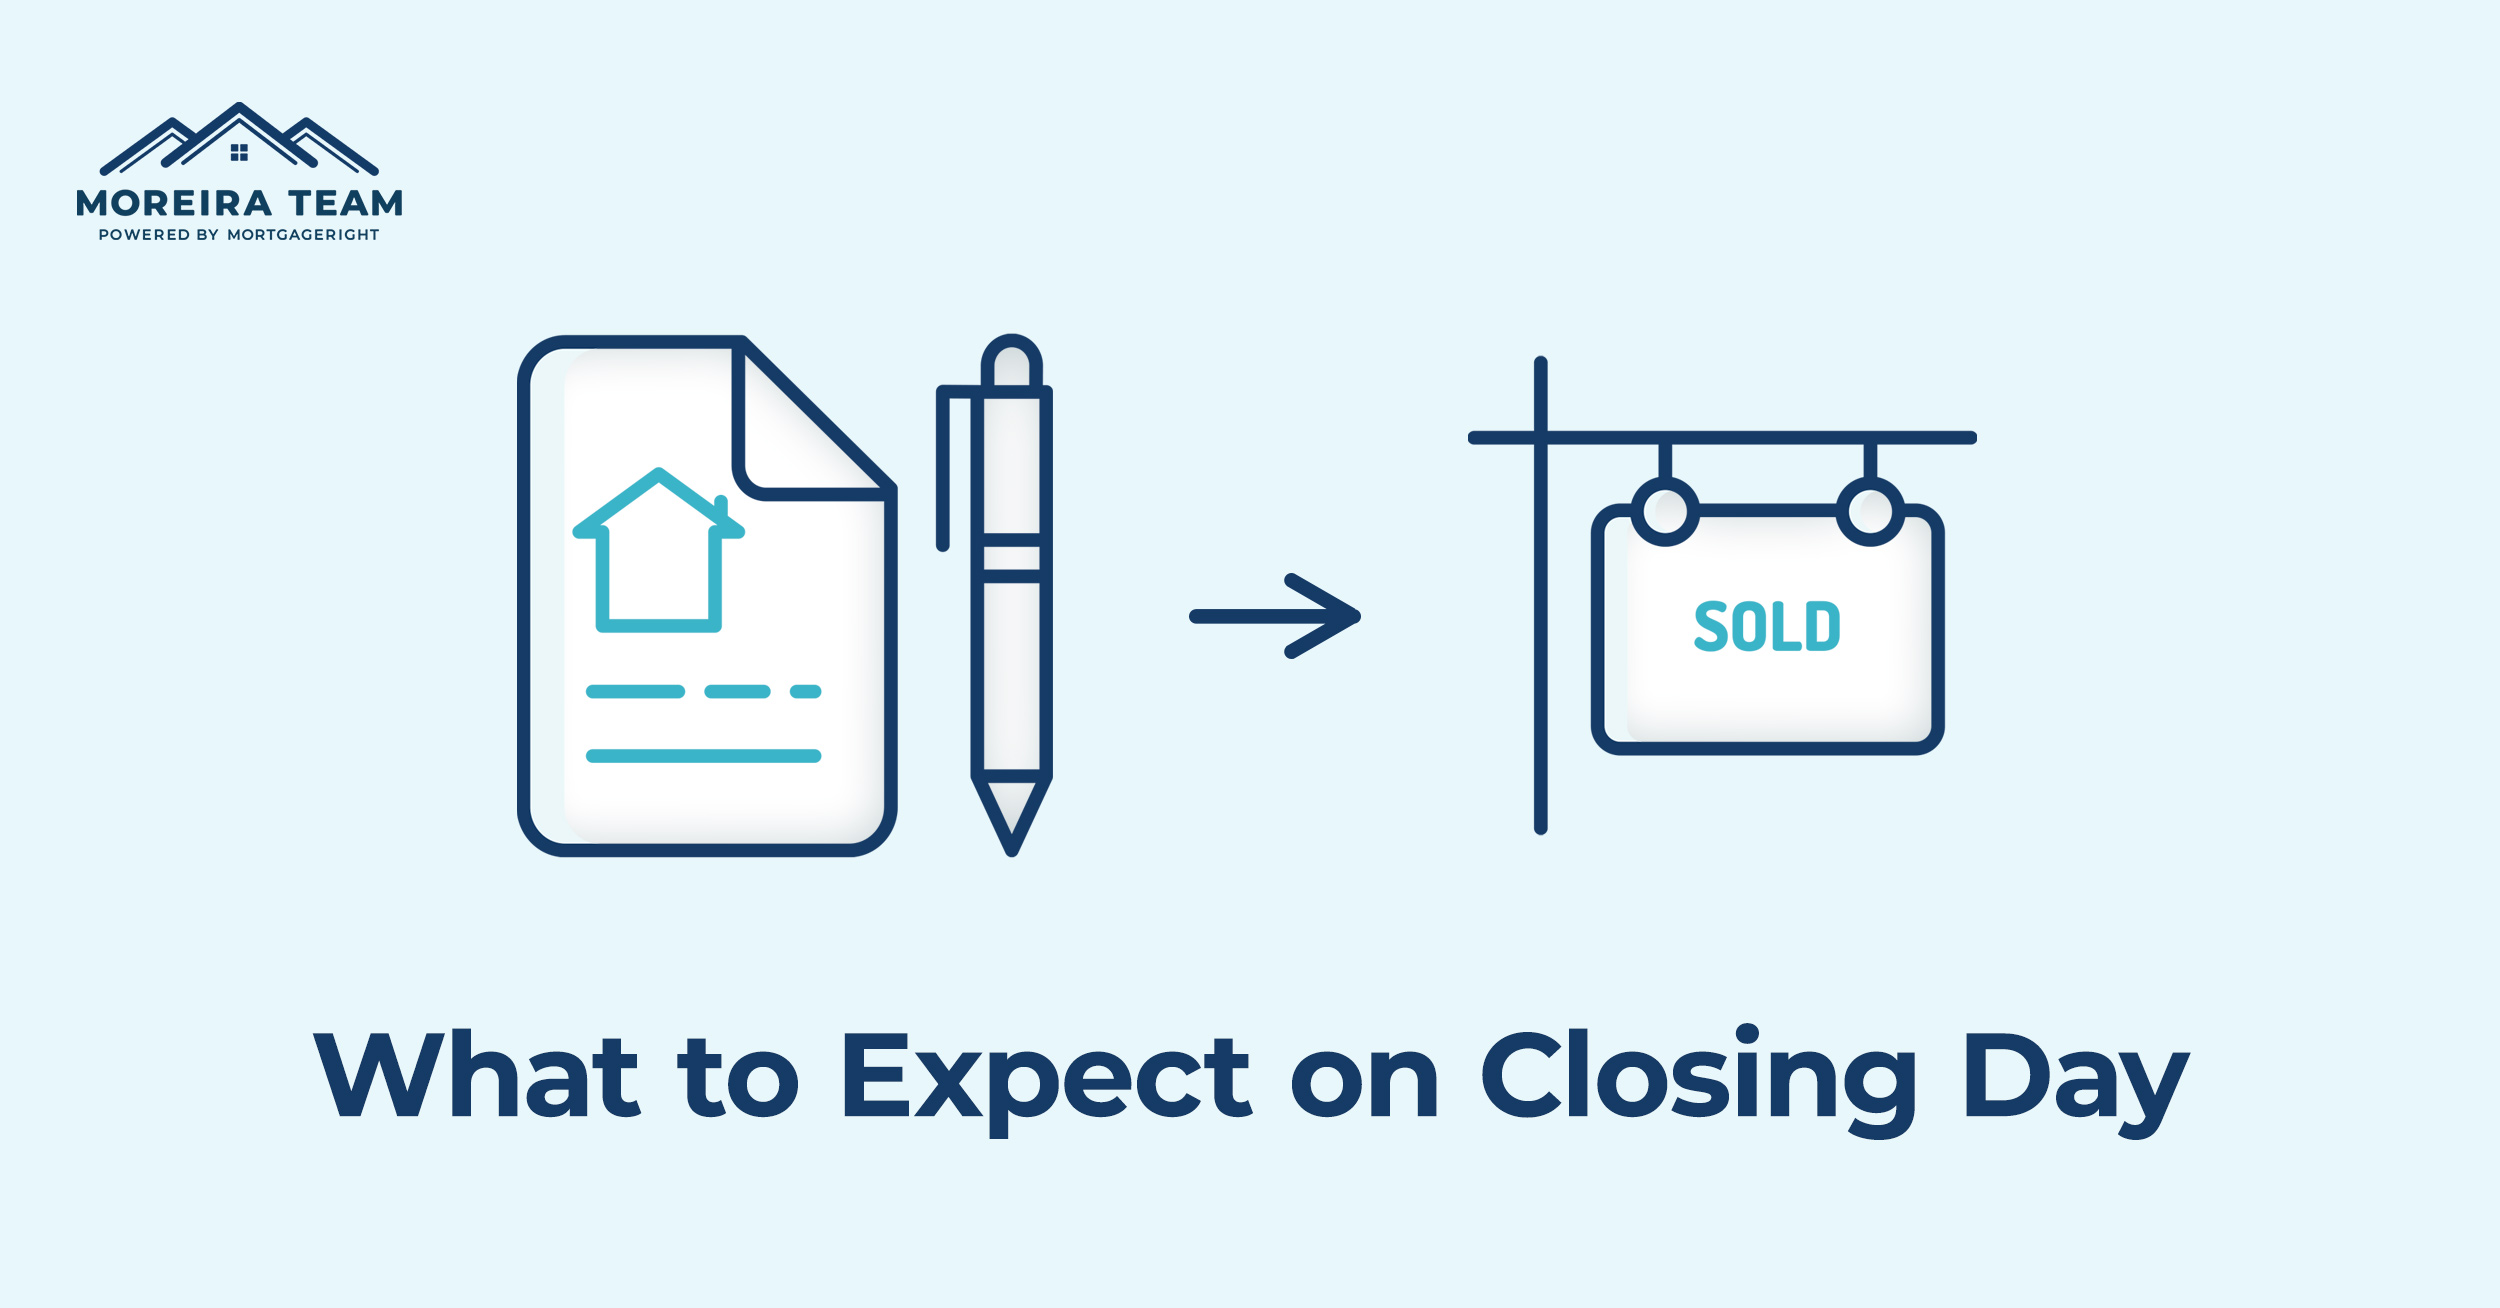 What Can I Expect to Happen on Closing Day?